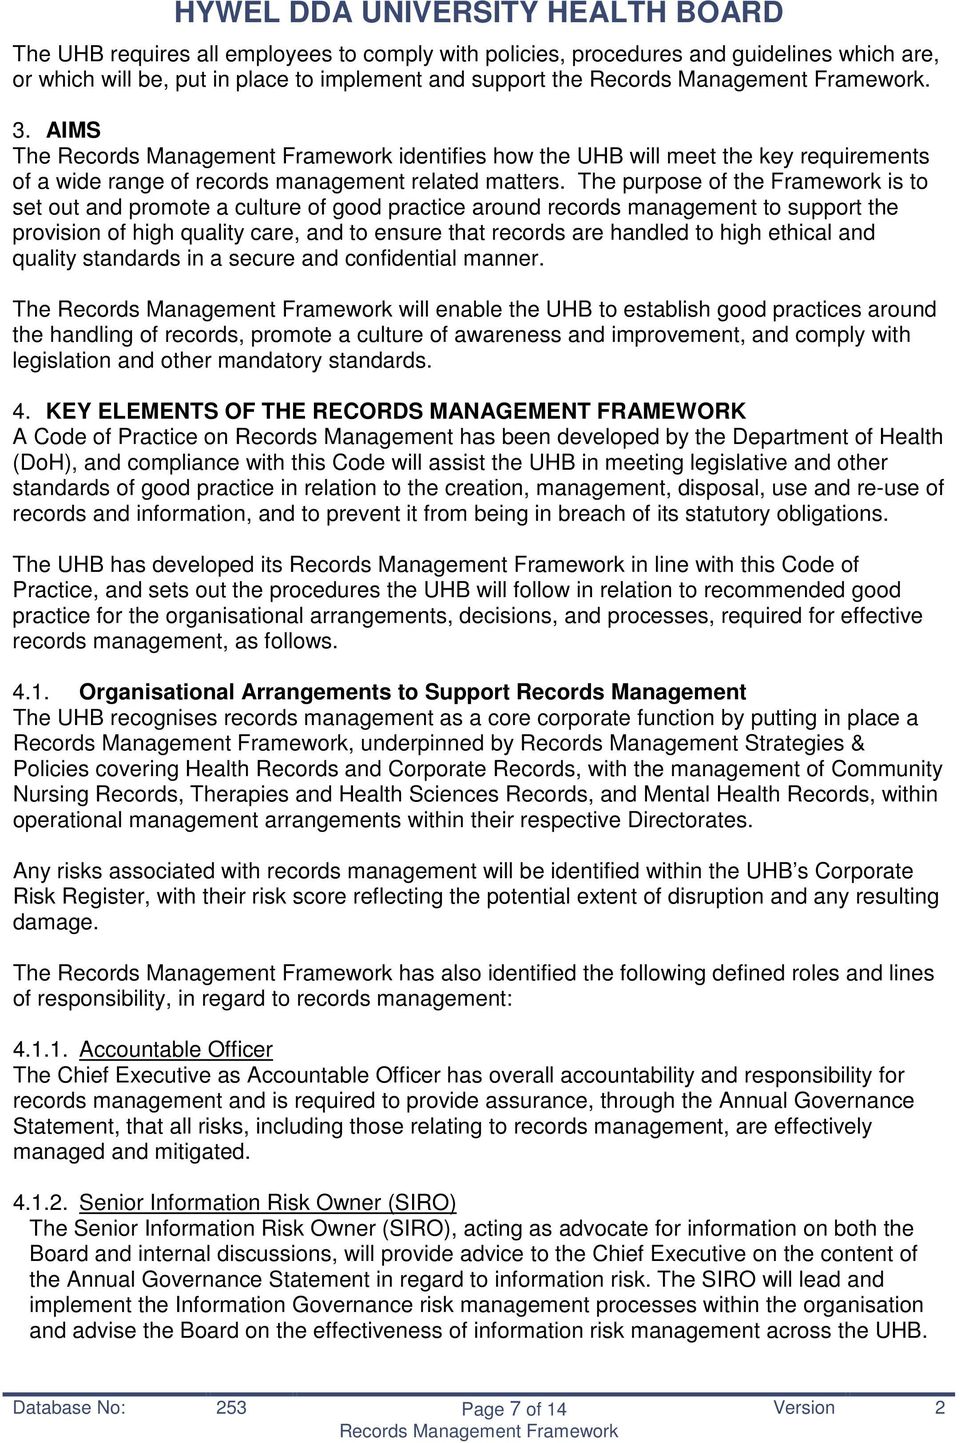 The purpose of the Framework is to set out and promote a culture of good practice around records management to support the provision of high quality care, and to ensure that records are handled to